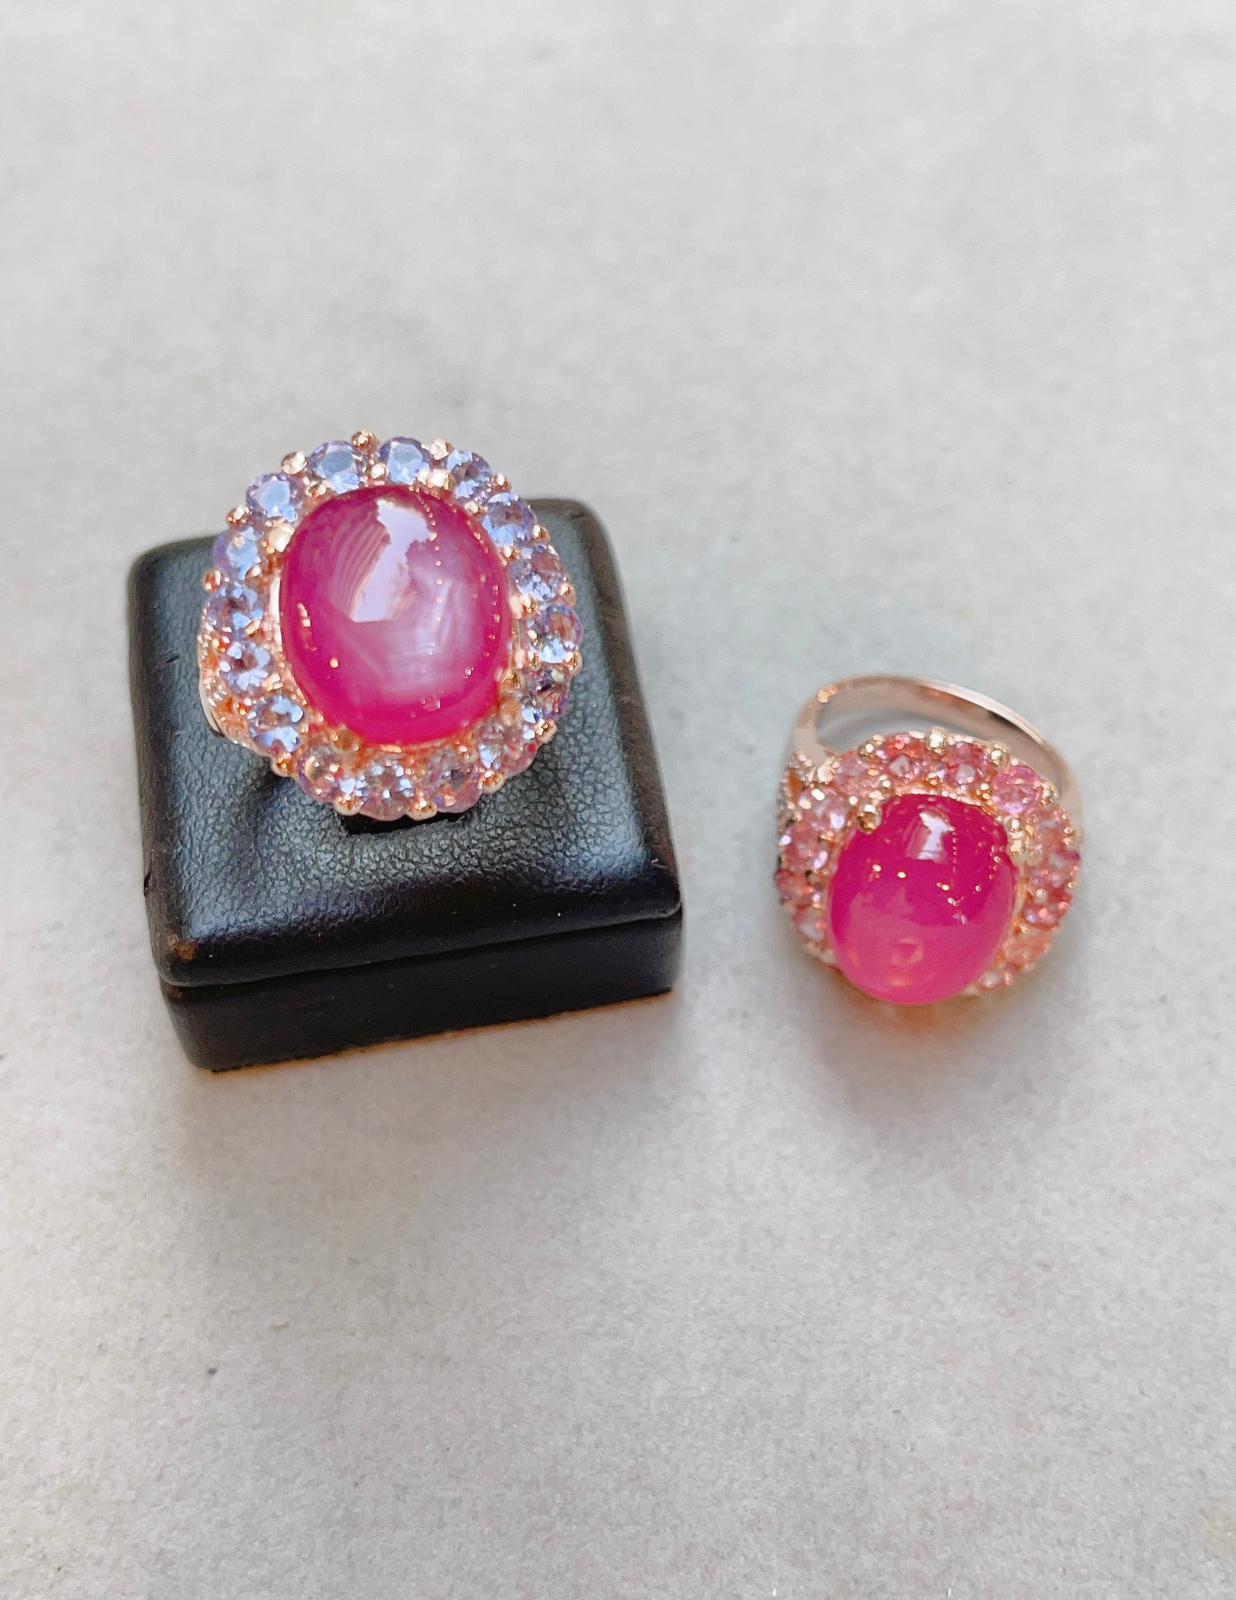 Bochic “Capri” Star Ruby Ring with Pink Sapphires set in 22K Gold & Silver 1